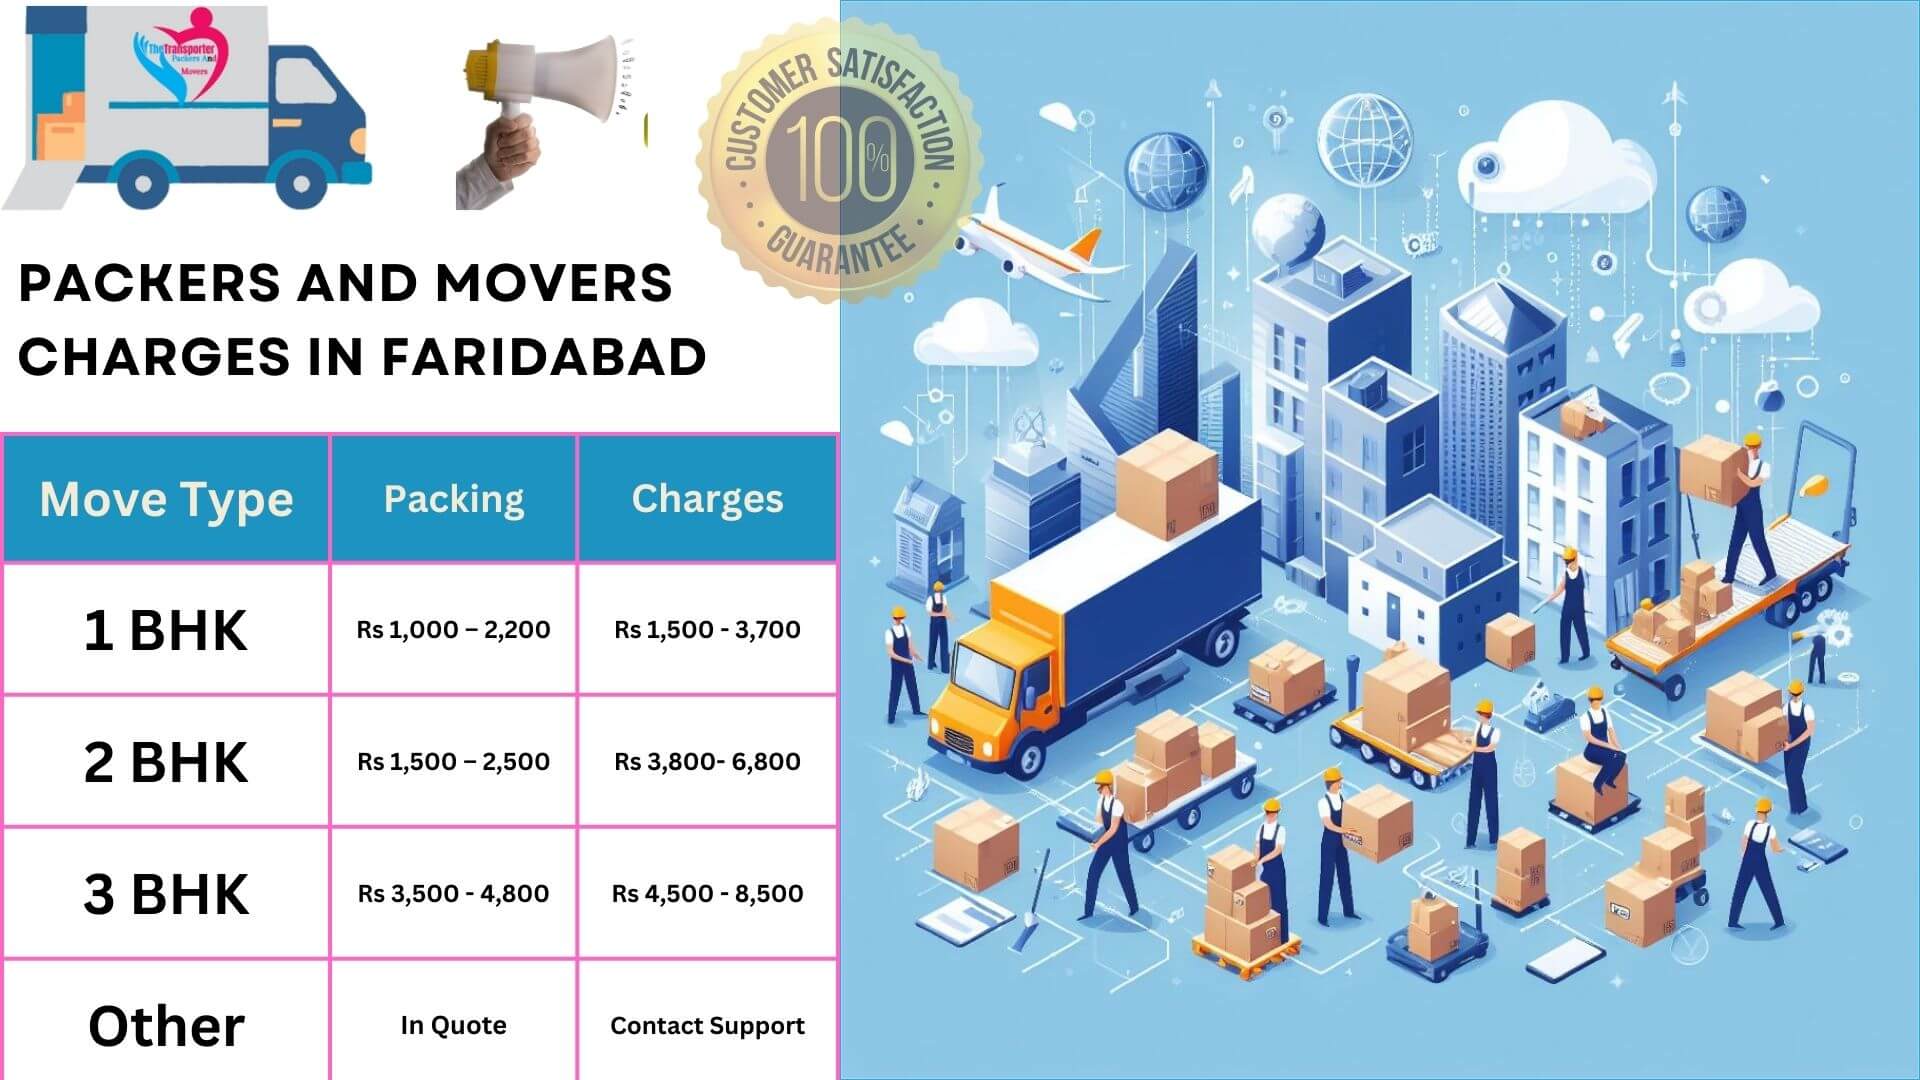 TheTransporter Packers and movers Charges list in Faridabad 